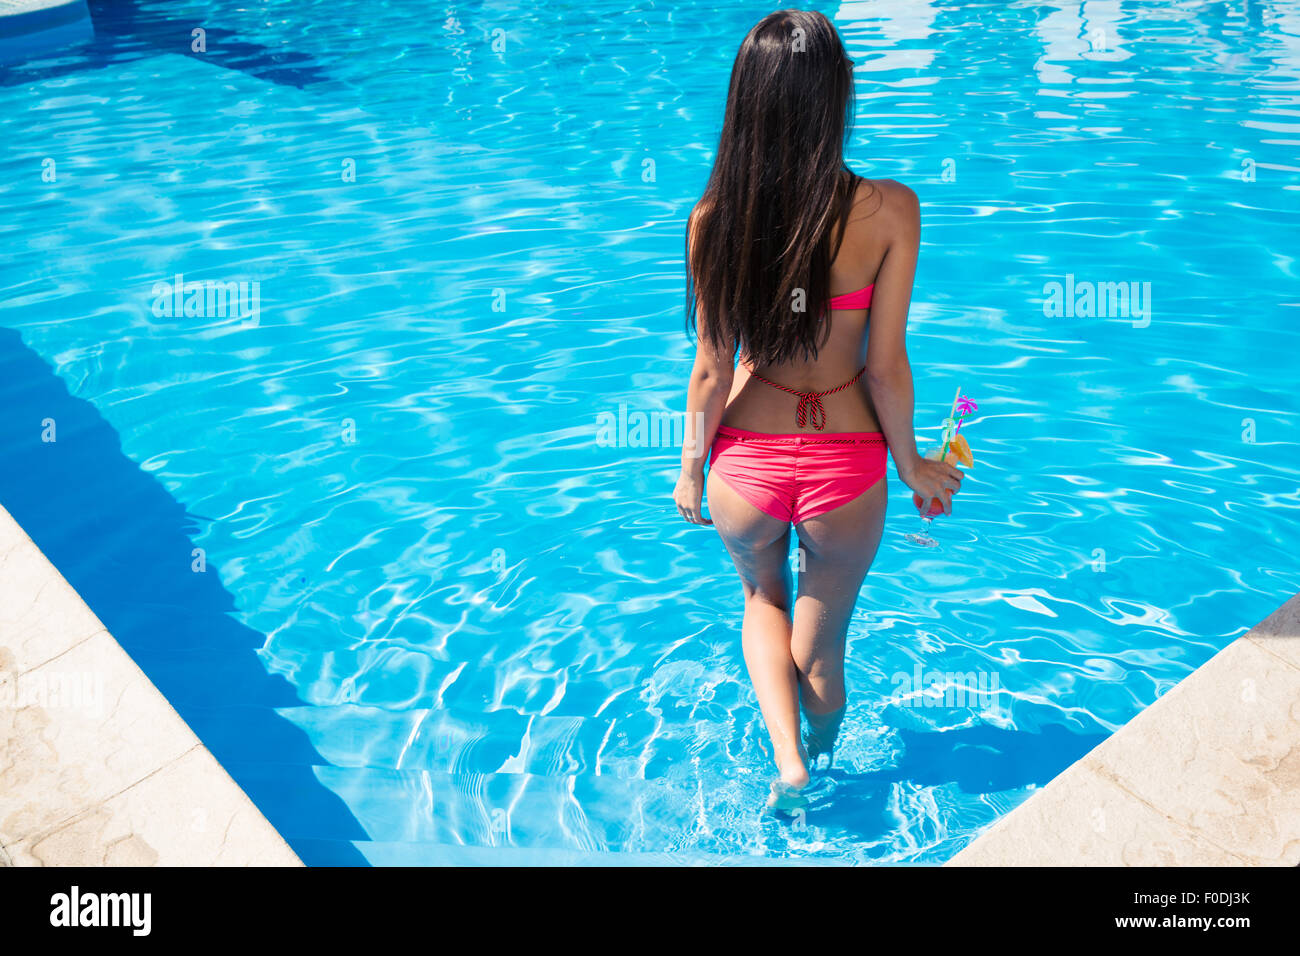 Back view portrait of a woman standing in swimming pool Stock Photo